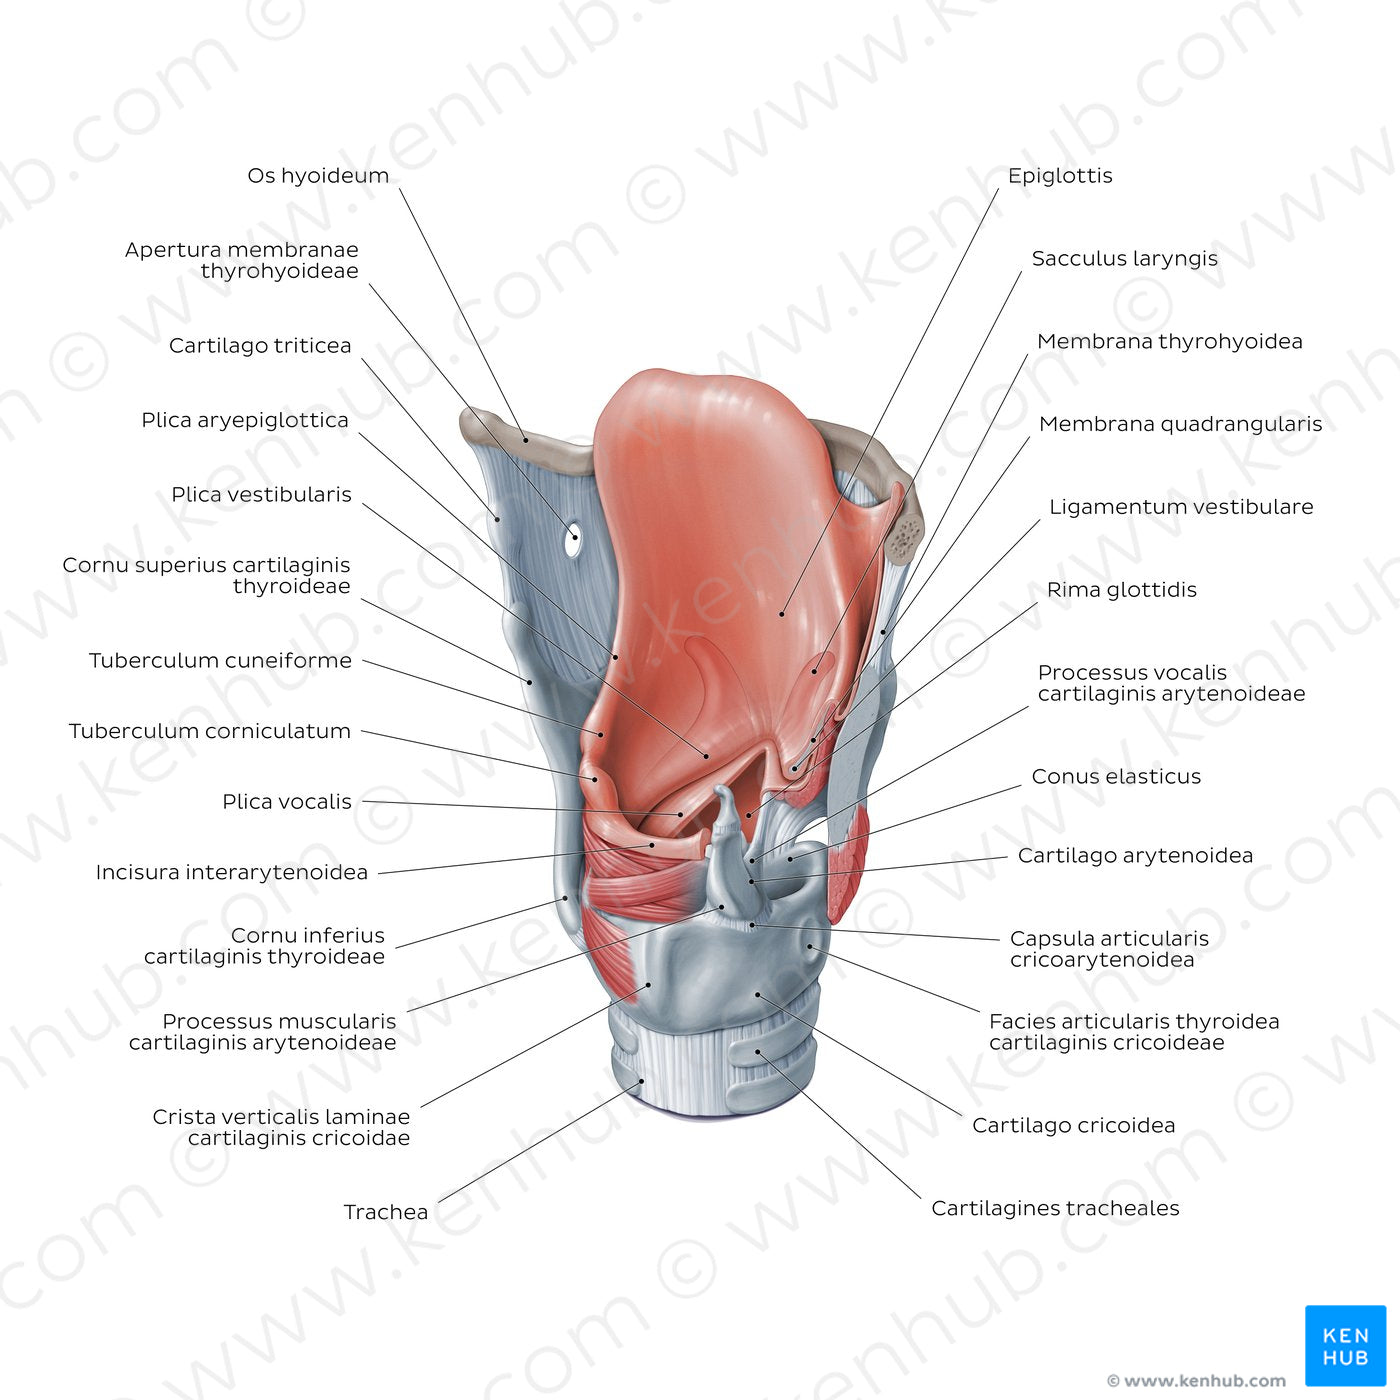 Structure of the larynx: posterolateral view (Latin)